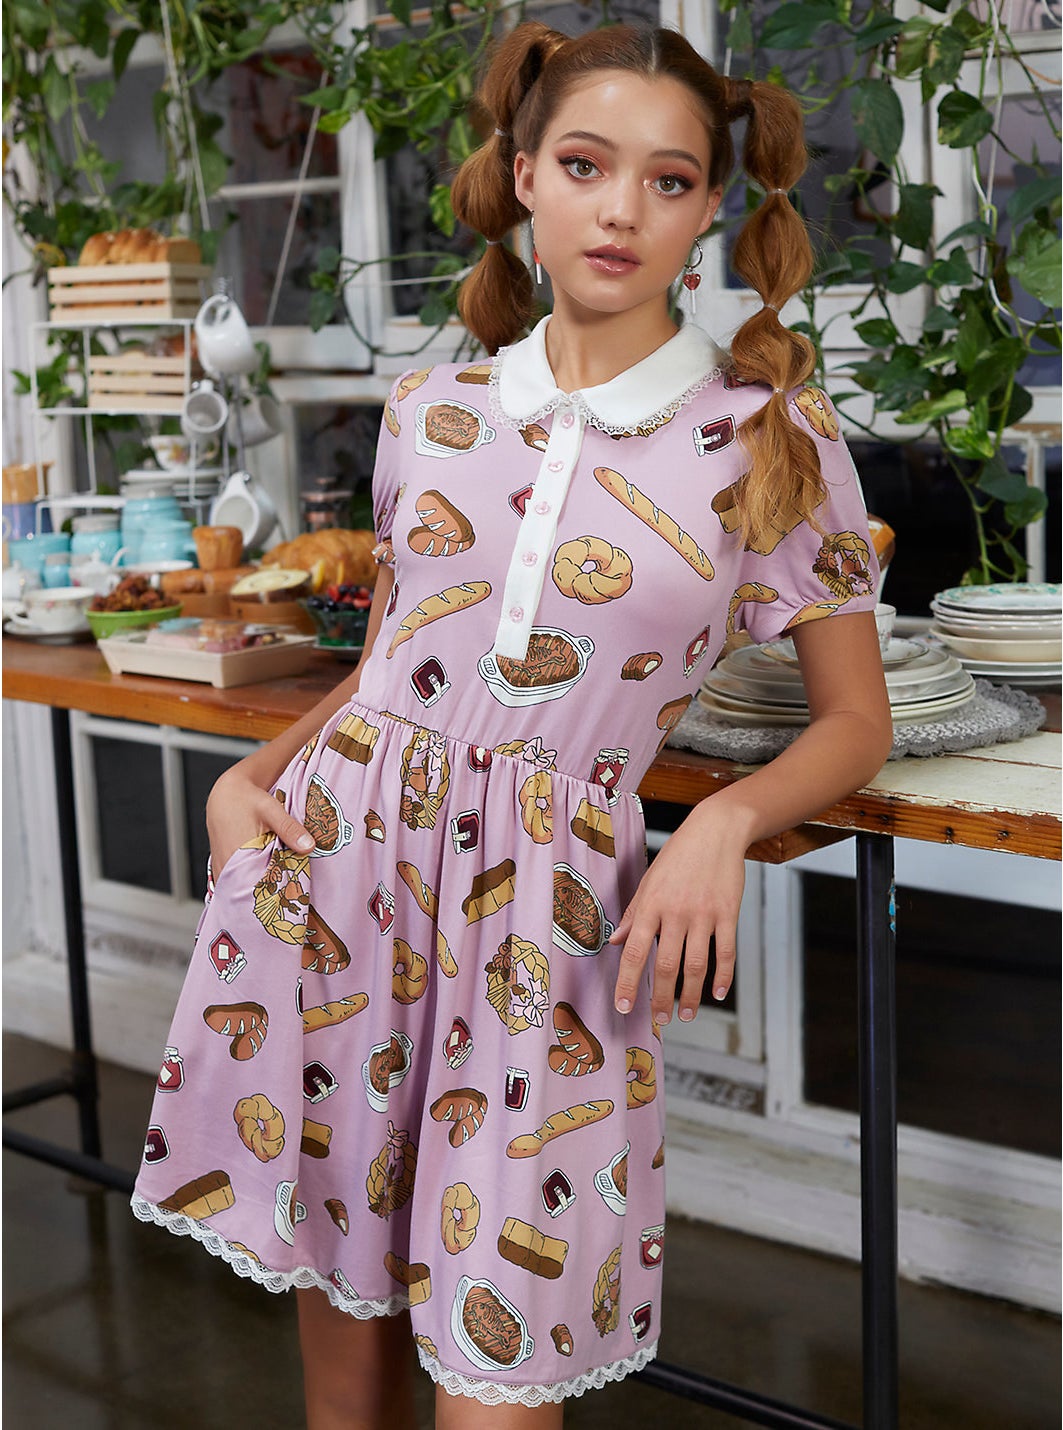 Model in short sleeve pink peter pan collar dress with white lace trim and print of various foods and baked goods from the movie